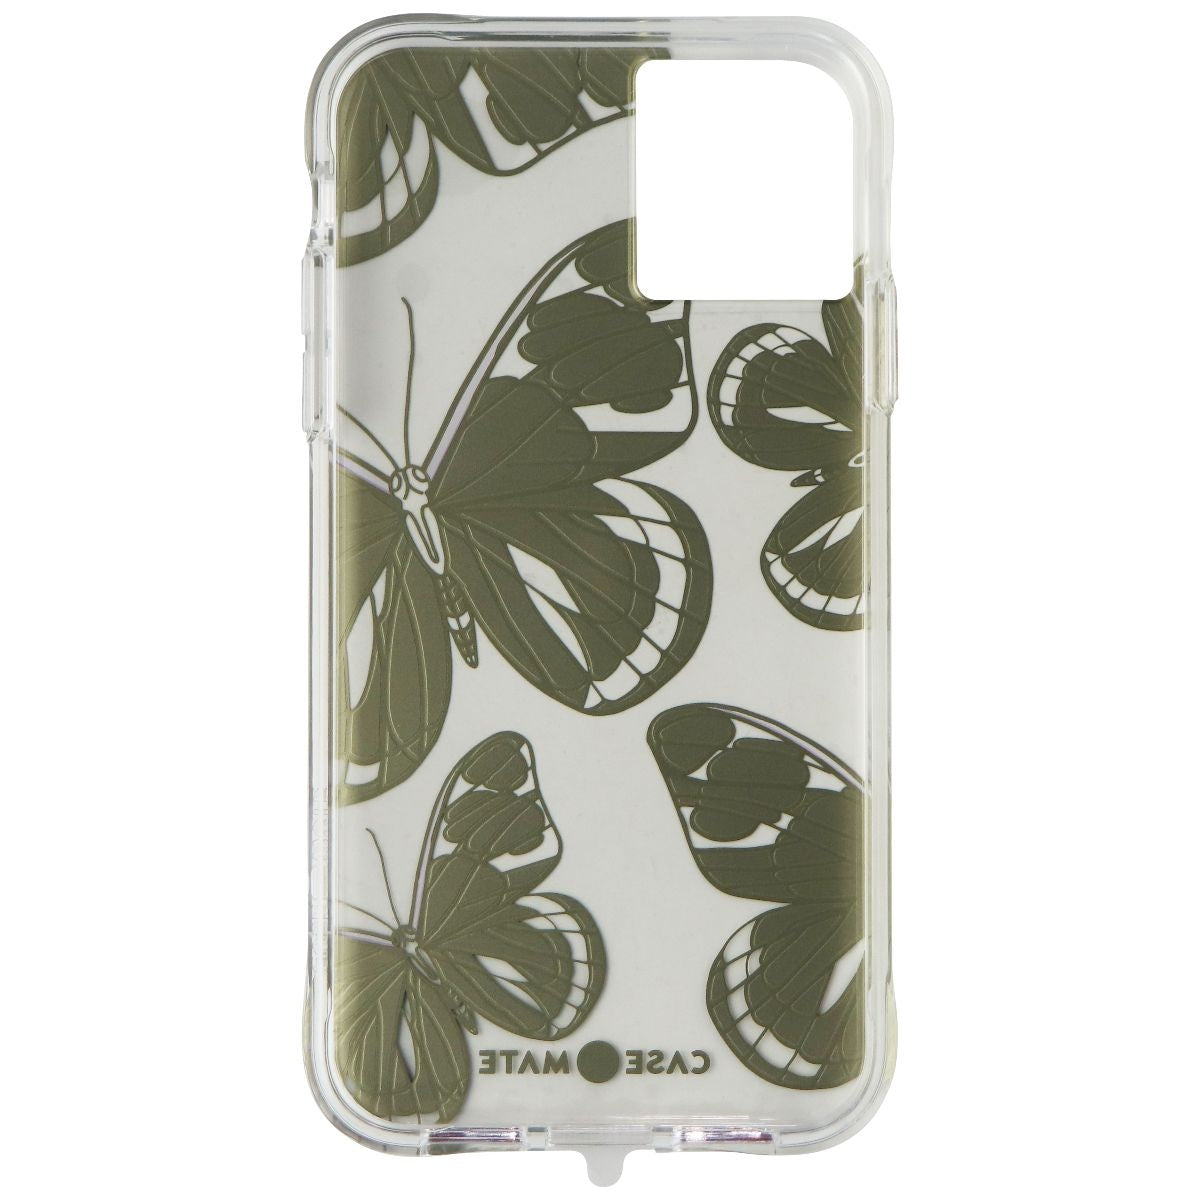 Case-Mate Prints Hardshell Case for iPhone 11 / iPhone XR - Butterflies/Clear Cell Phone - Cases, Covers & Skins Case-Mate    - Simple Cell Bulk Wholesale Pricing - USA Seller